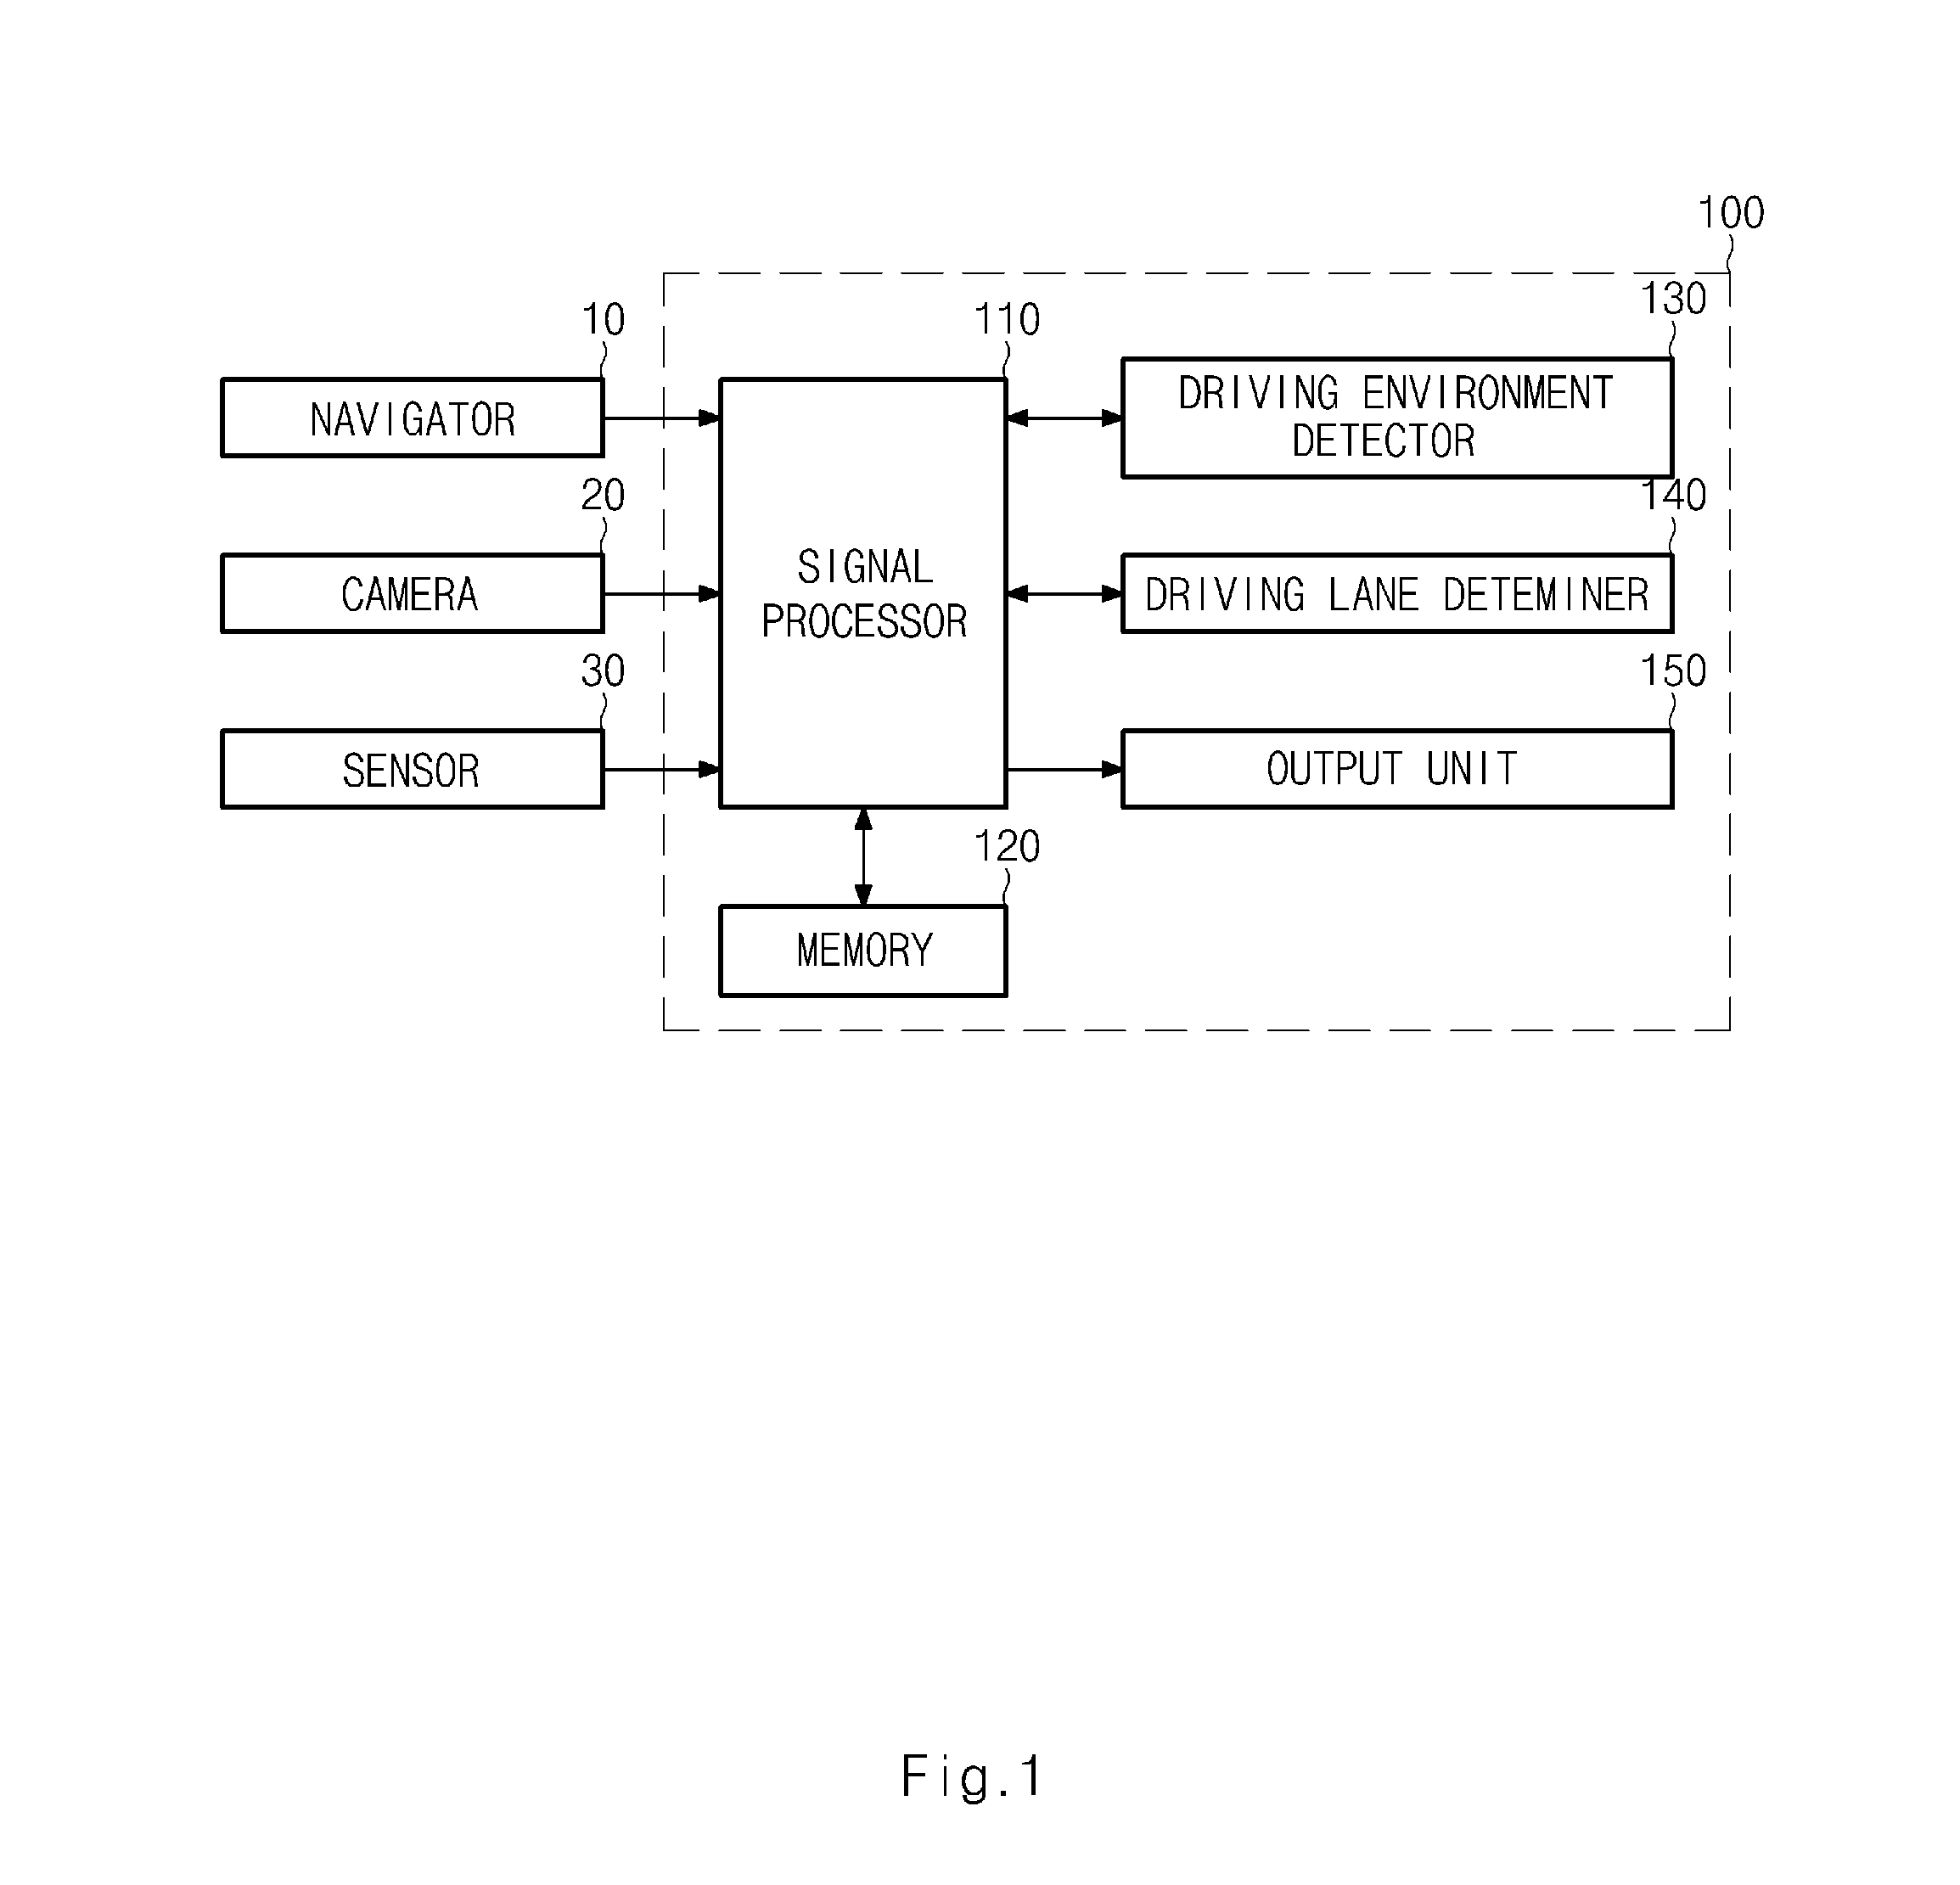 Apparatus and method for recognizing driving lane